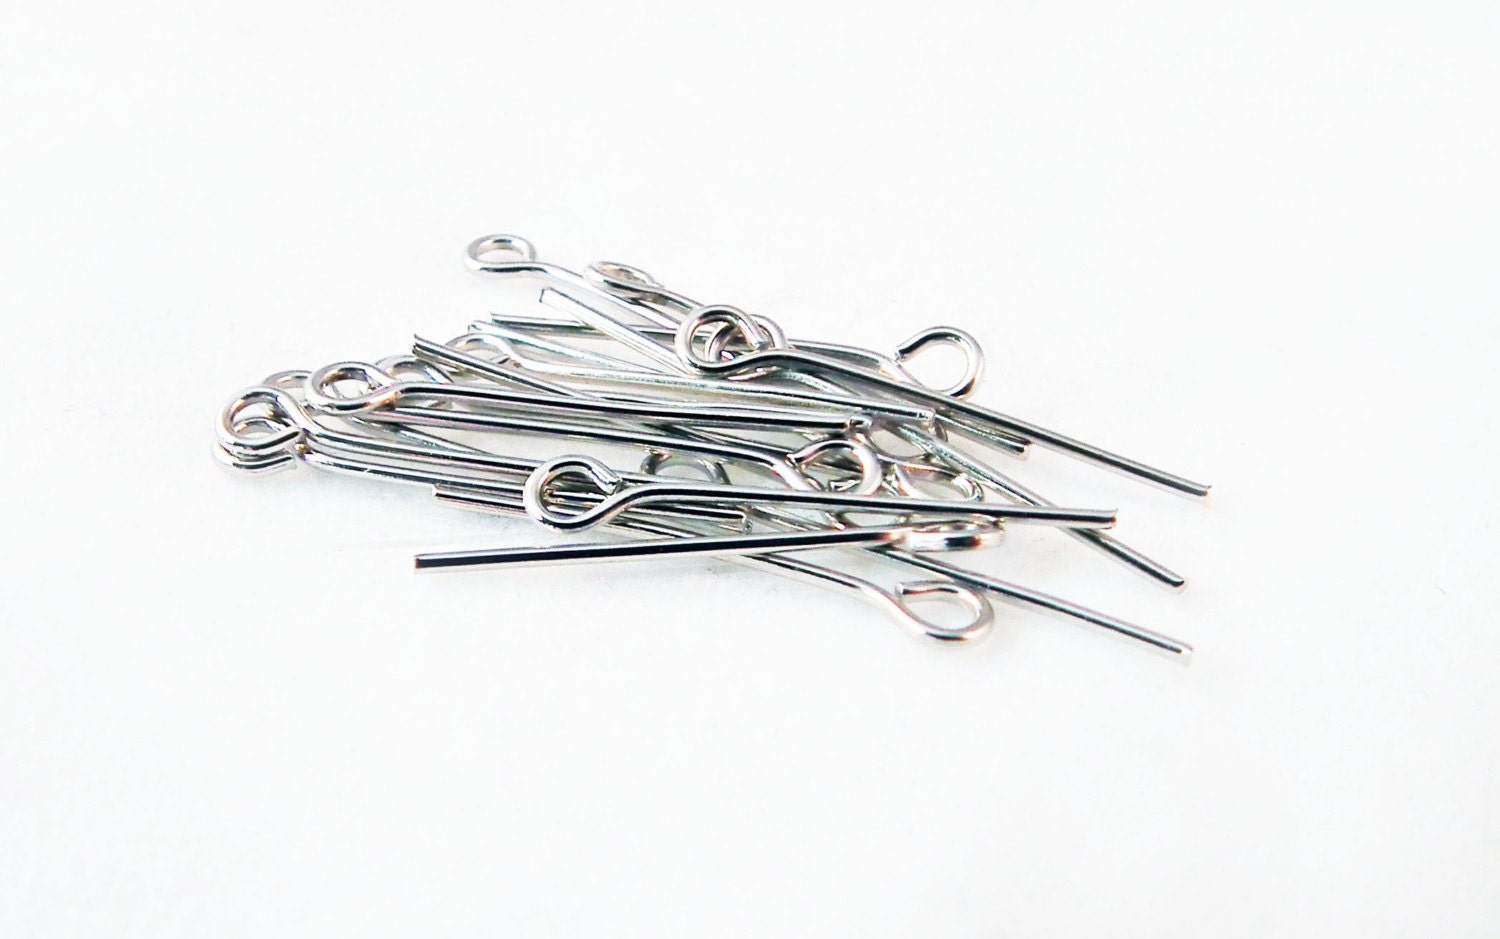 Set of nails from 20mm antique silver color eye pins  Set of 20mm Dull Dark Silver Eye Pins CEF10